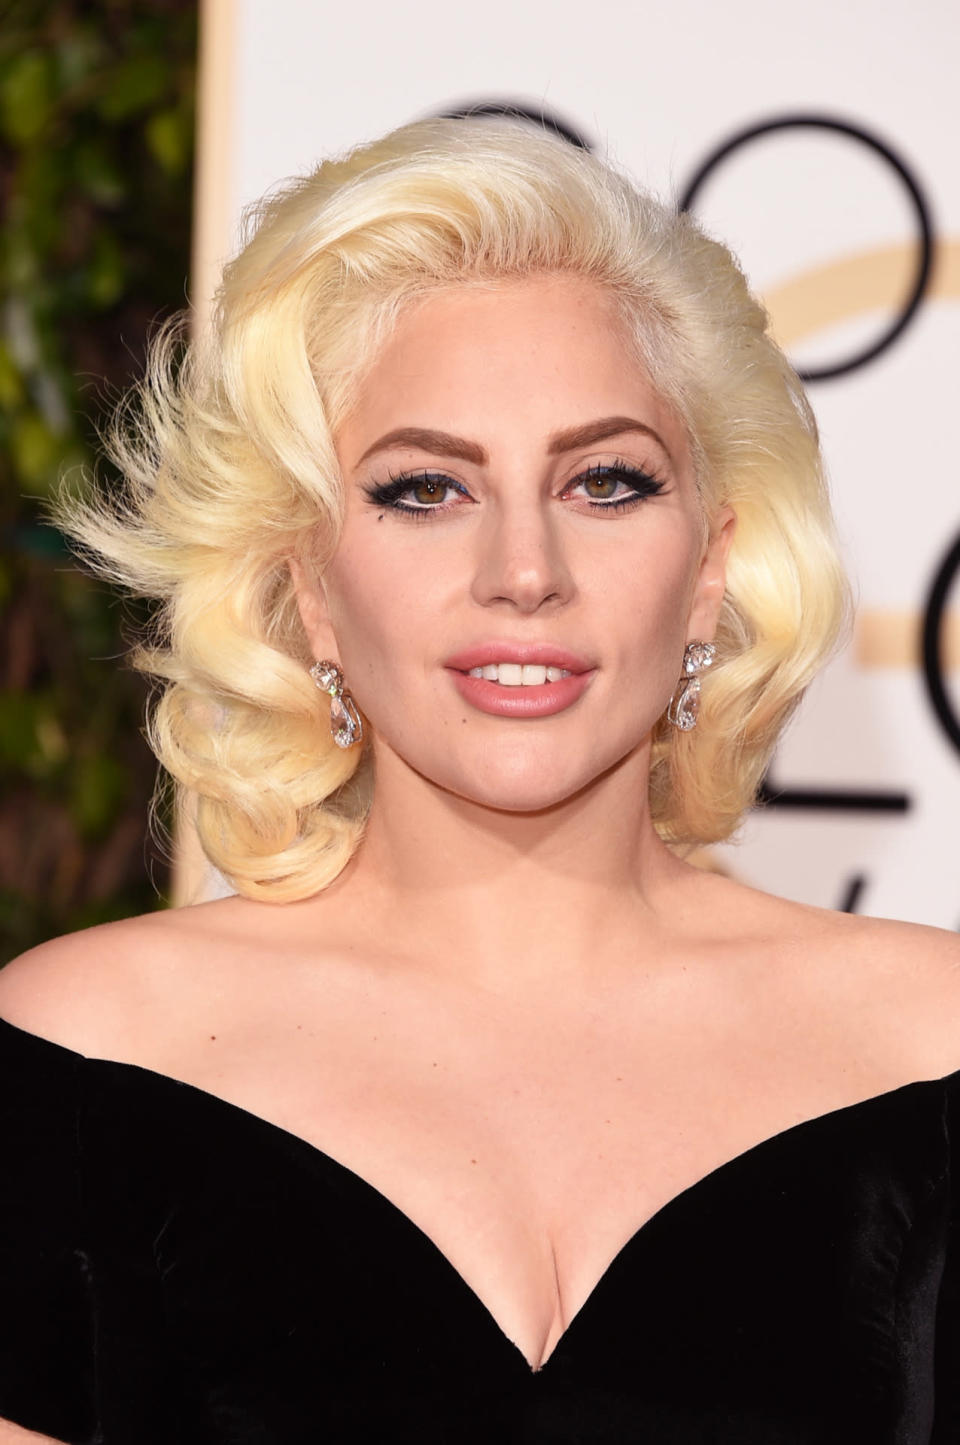 <p>Nothing is surprising when it comes to Lady Gaga — and her Marilyn Monroe-inspired blond waves were both classic and bold. <i>(Photo: Getty Images)</i></p>